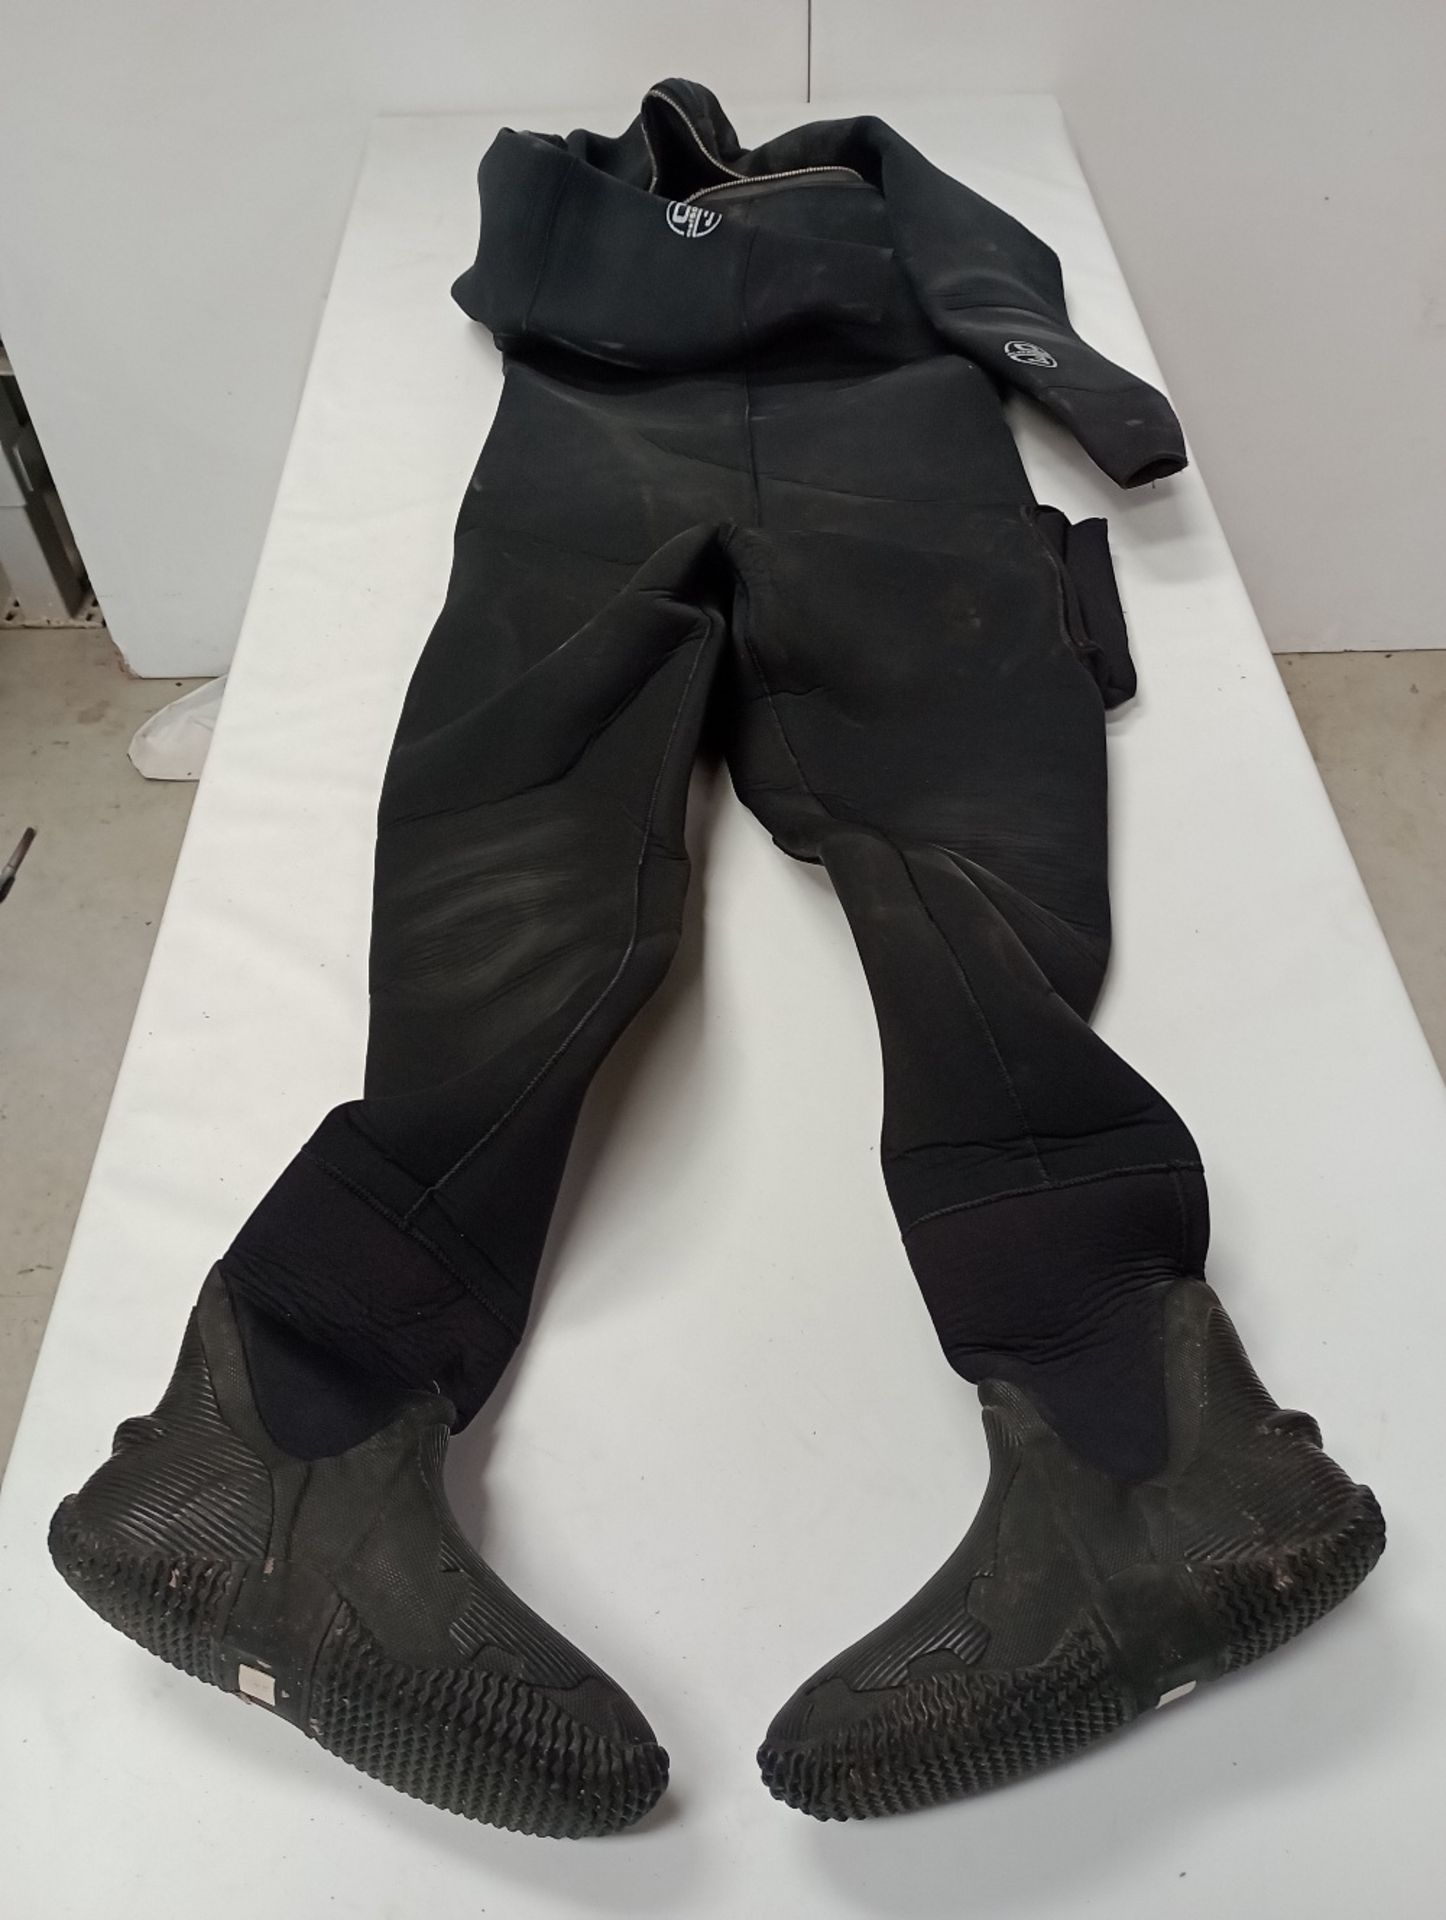 O'Three MSG500tb Drysuit, Serial No.ML-6509, Size 14, Suit ID No. 5C0889105 (Location: Brentwood. - Image 3 of 5